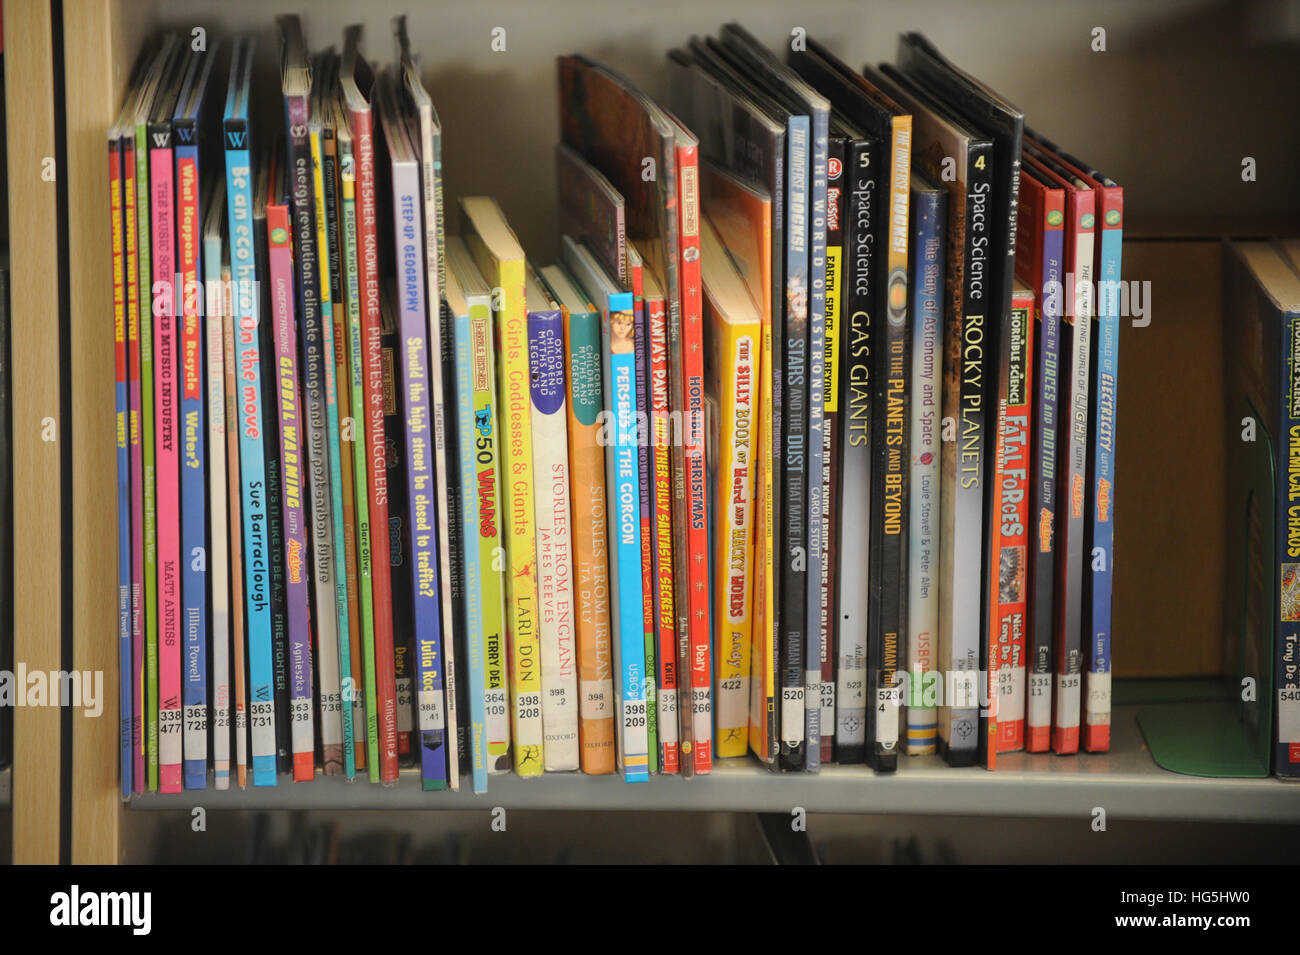 Books lines up on a library shelf. Stock Photo